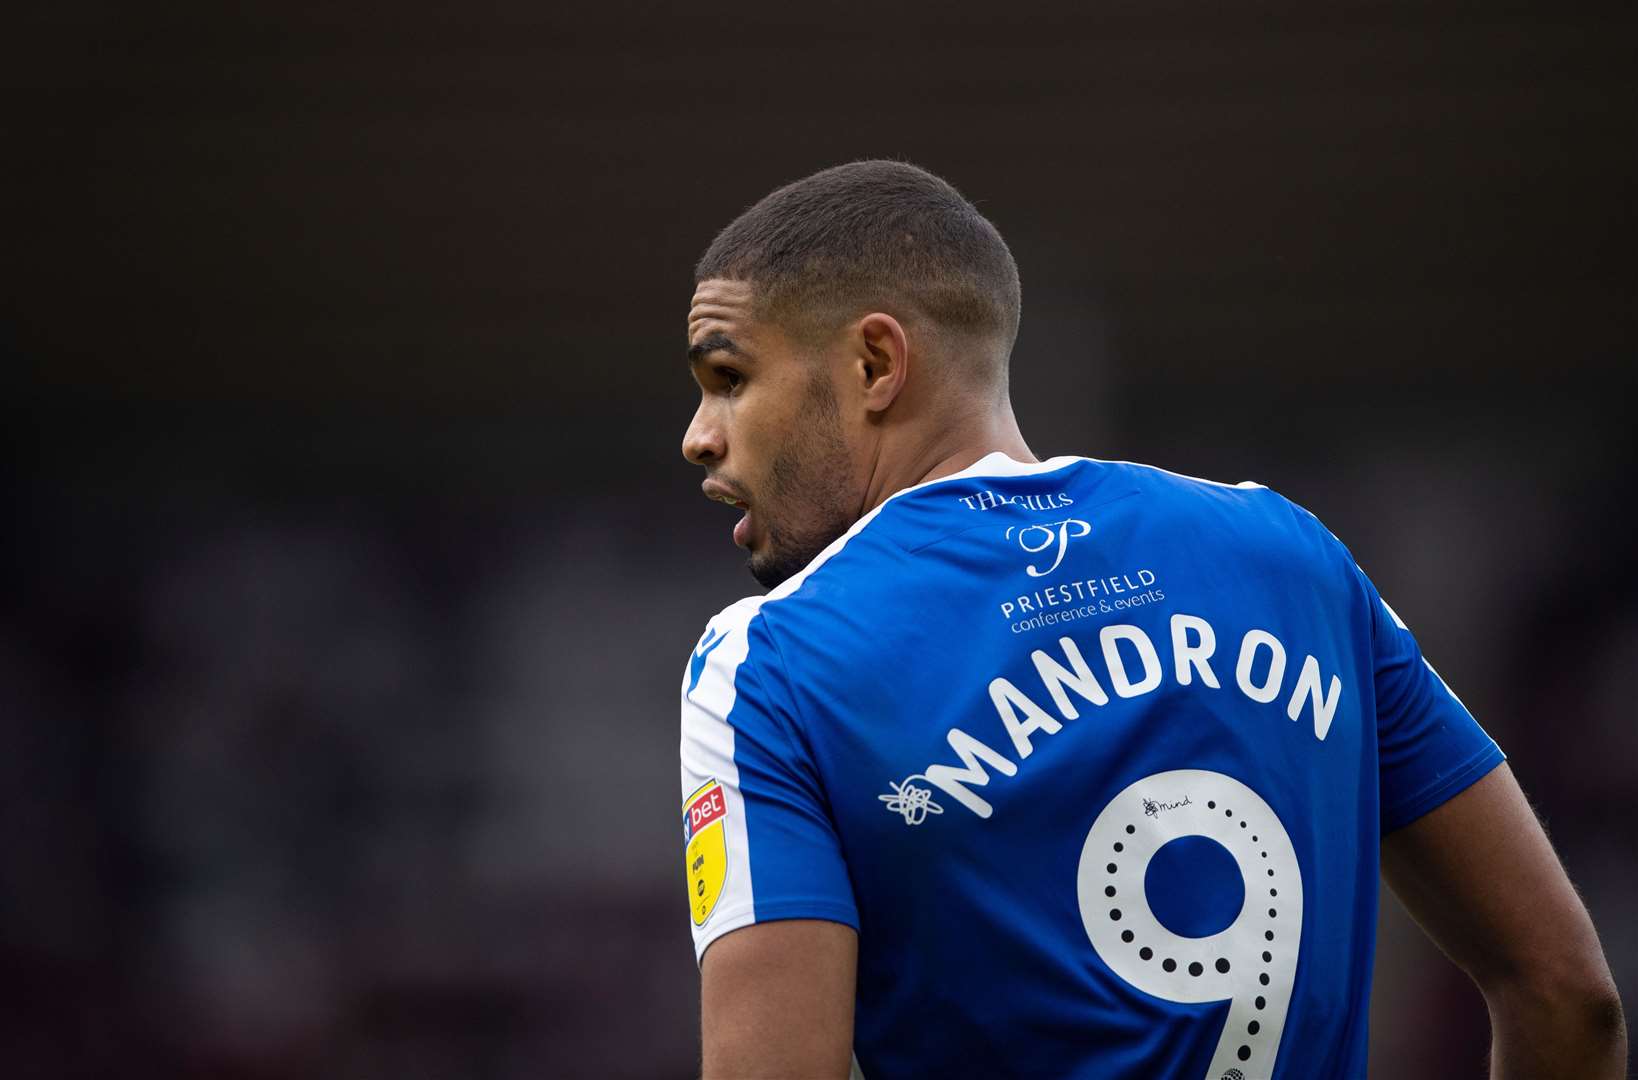 Mikael Mandron had a goal ruled out before scoring in the last minute at Wimbledon